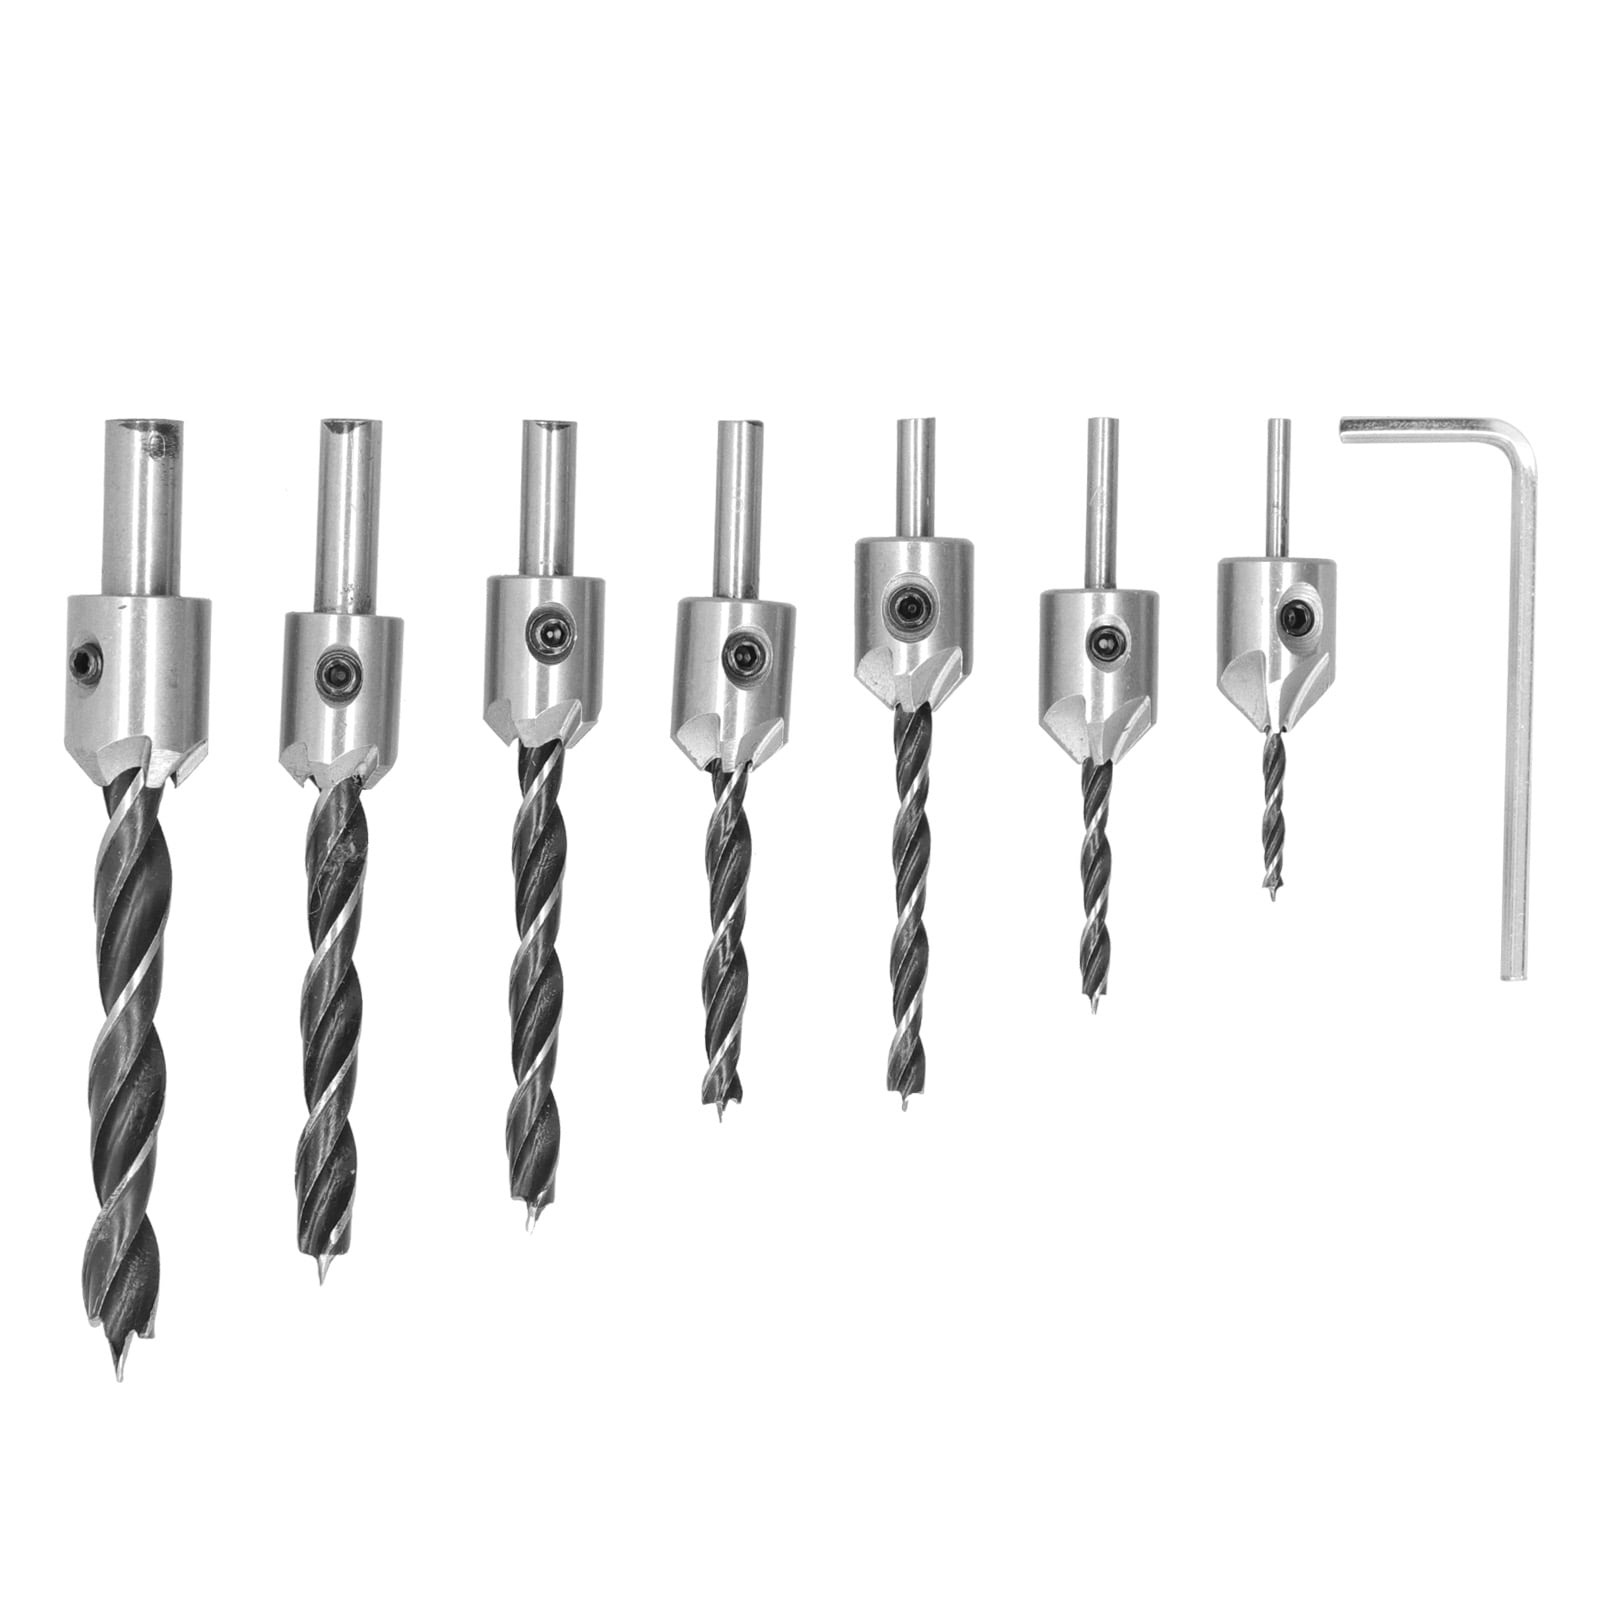 Plastic 8 PCS Countersink Drill Bit with Hex Key Adjustable Woodworking Chamfer High-Speed Steel Countersink Bit for Wood PVC Plywood 